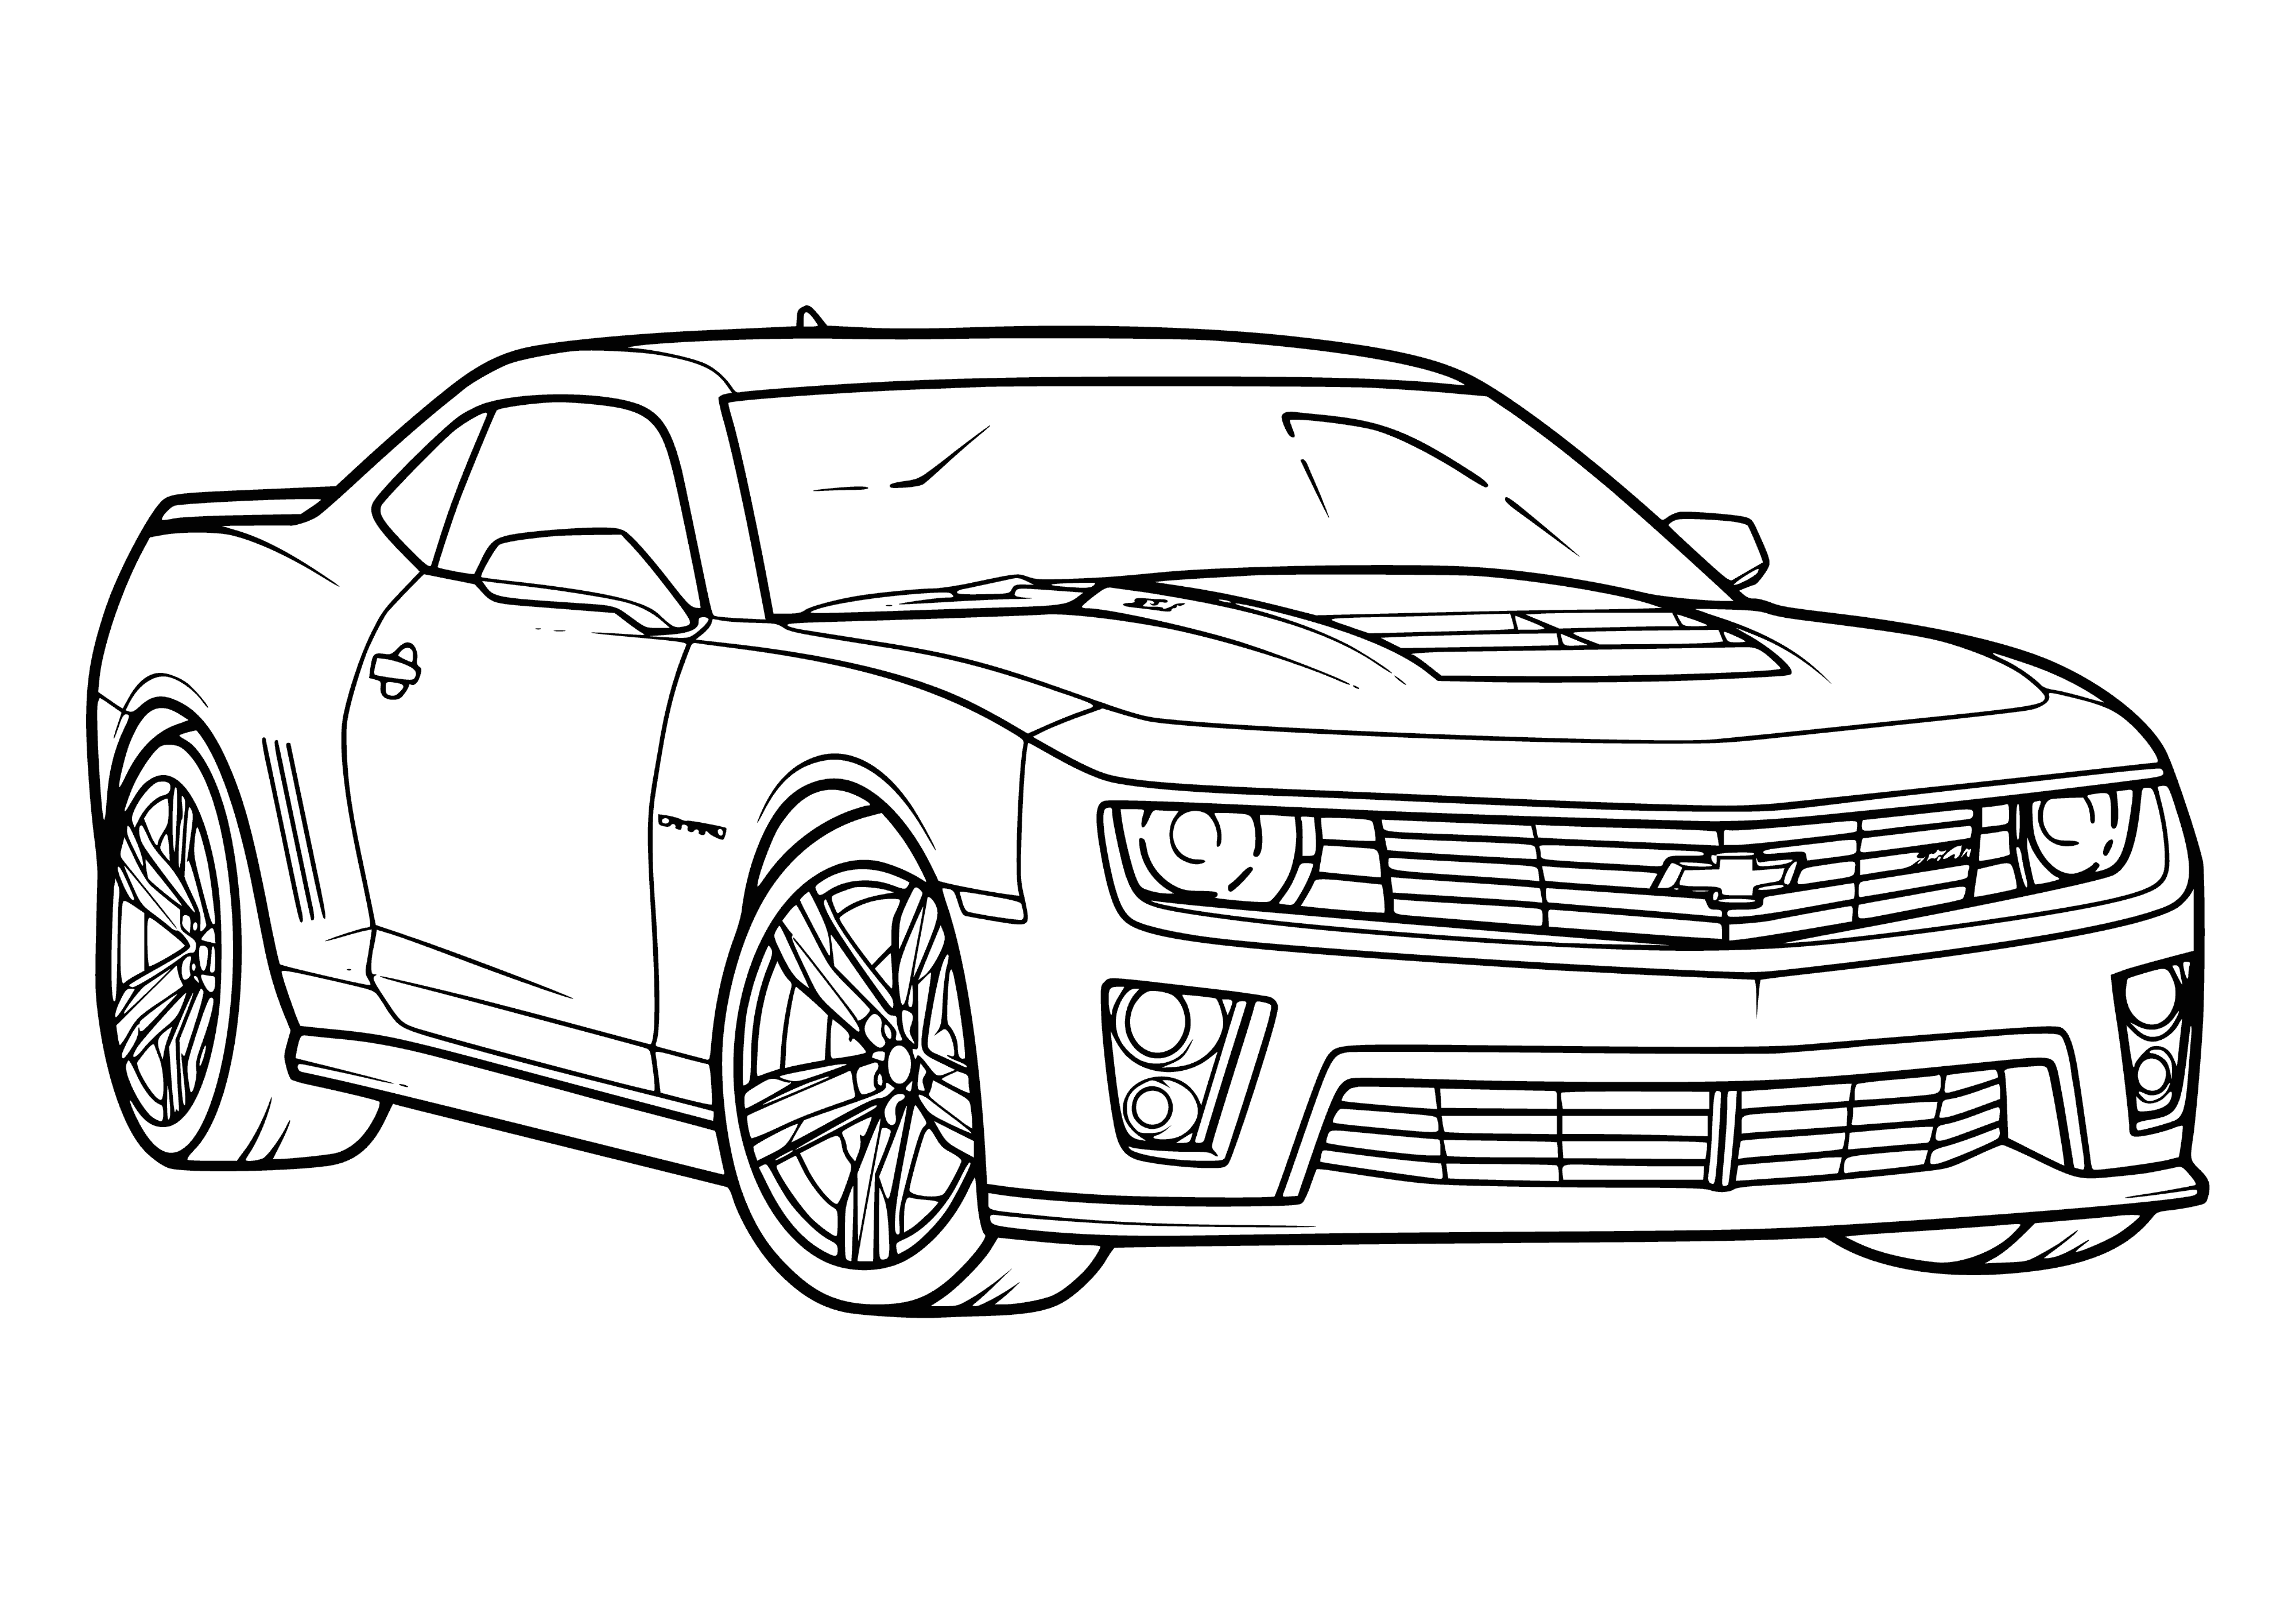 coloring page: Parked blue 4-door Chevy car on residential street has trunk, Chevy logo, tinted windows.